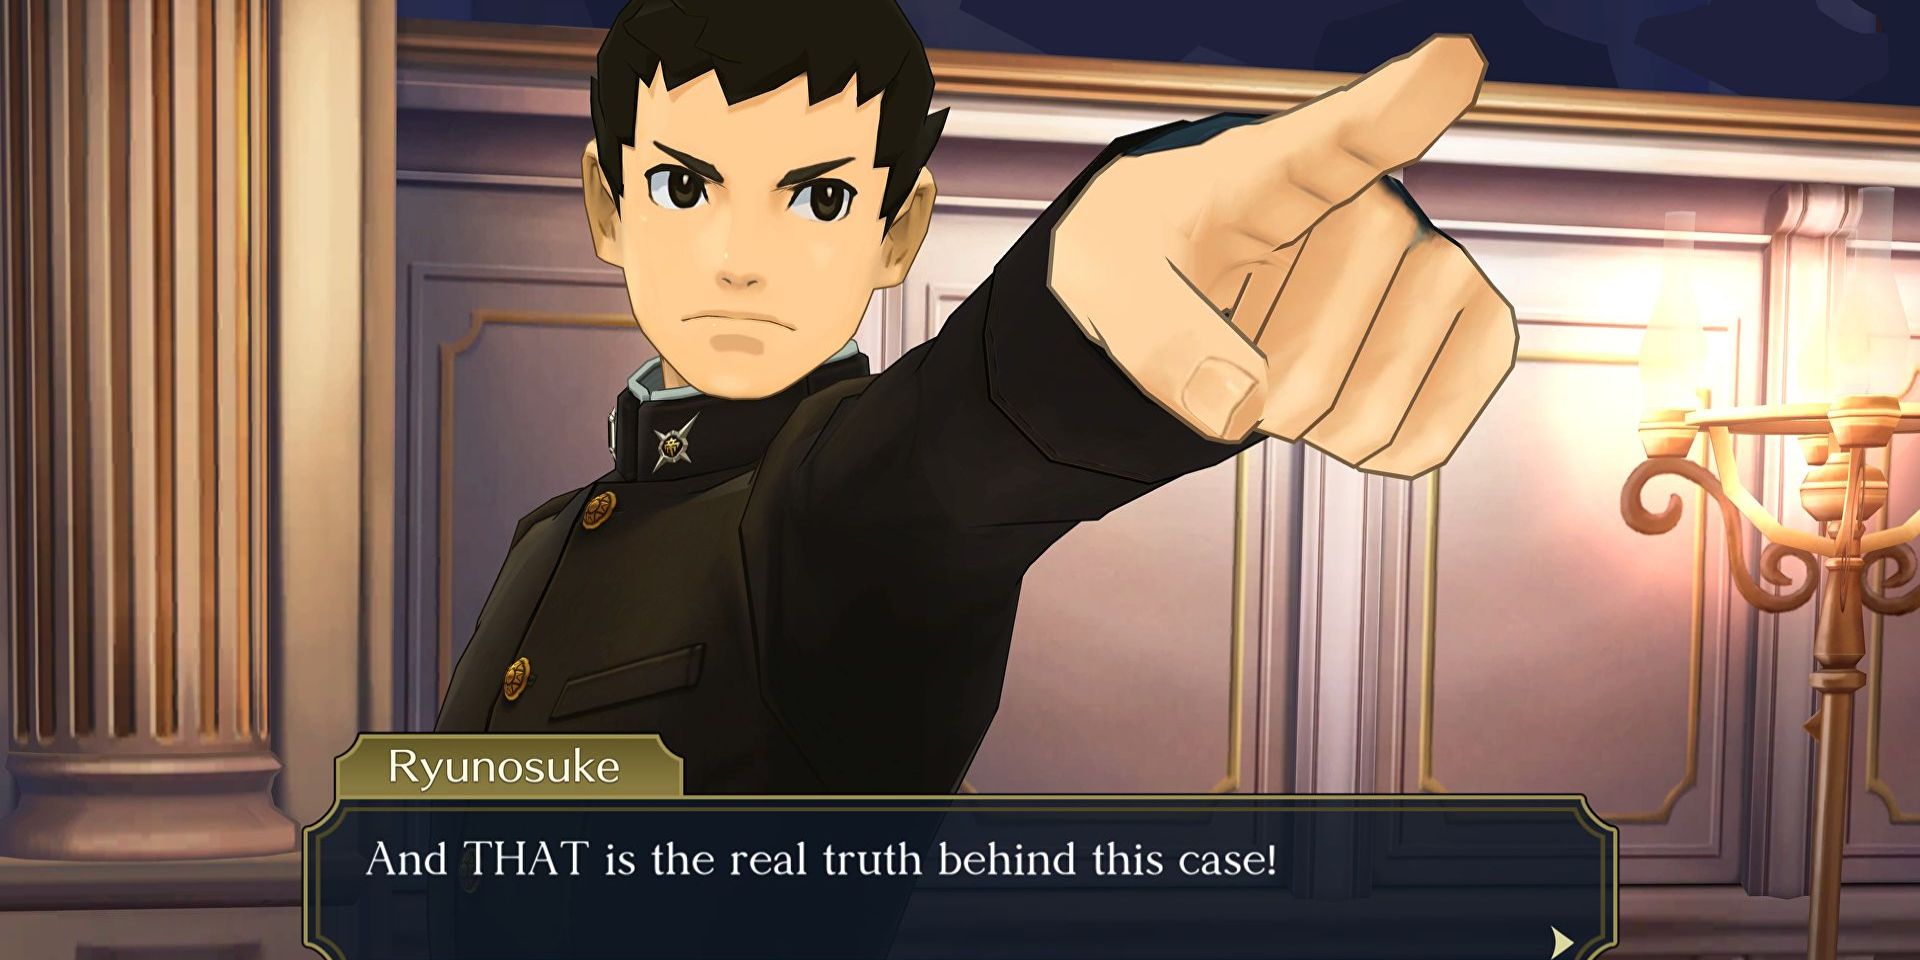 Ryunosuke points as he makes a declarative staement in the courtroom in Ace Attorney.